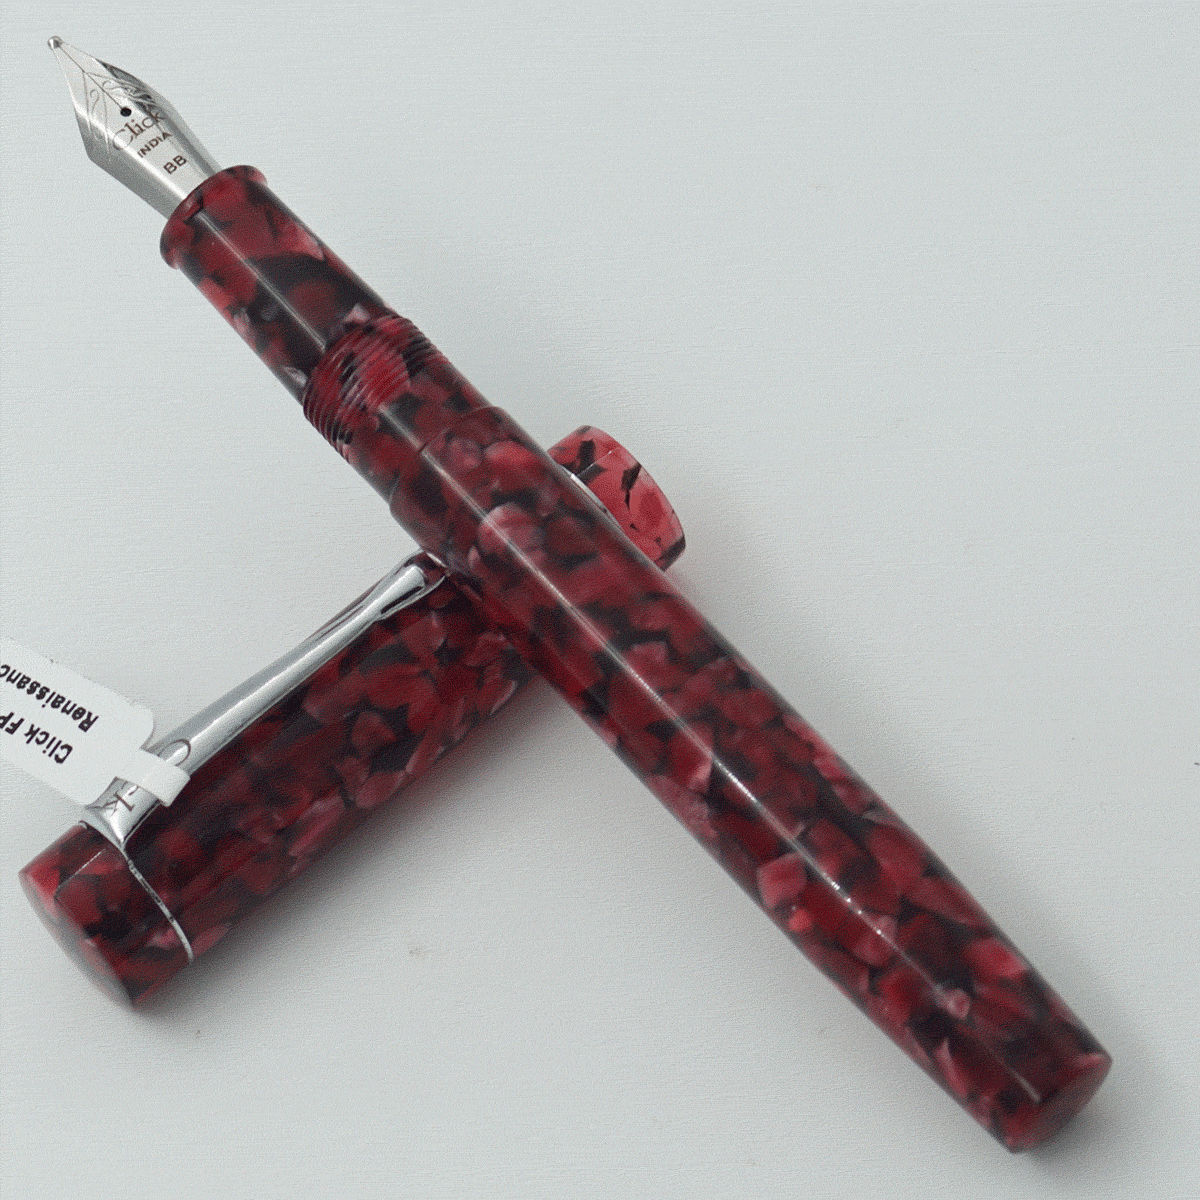 Click Renaissance Ruby Red Color Acrylic Body And Cap Silver Color Clip No 35 SSF BB Double Broad Nib Eye Dropper Model Fountain Pen (3 in 1) (Nib Can be Customised) SKU 24042